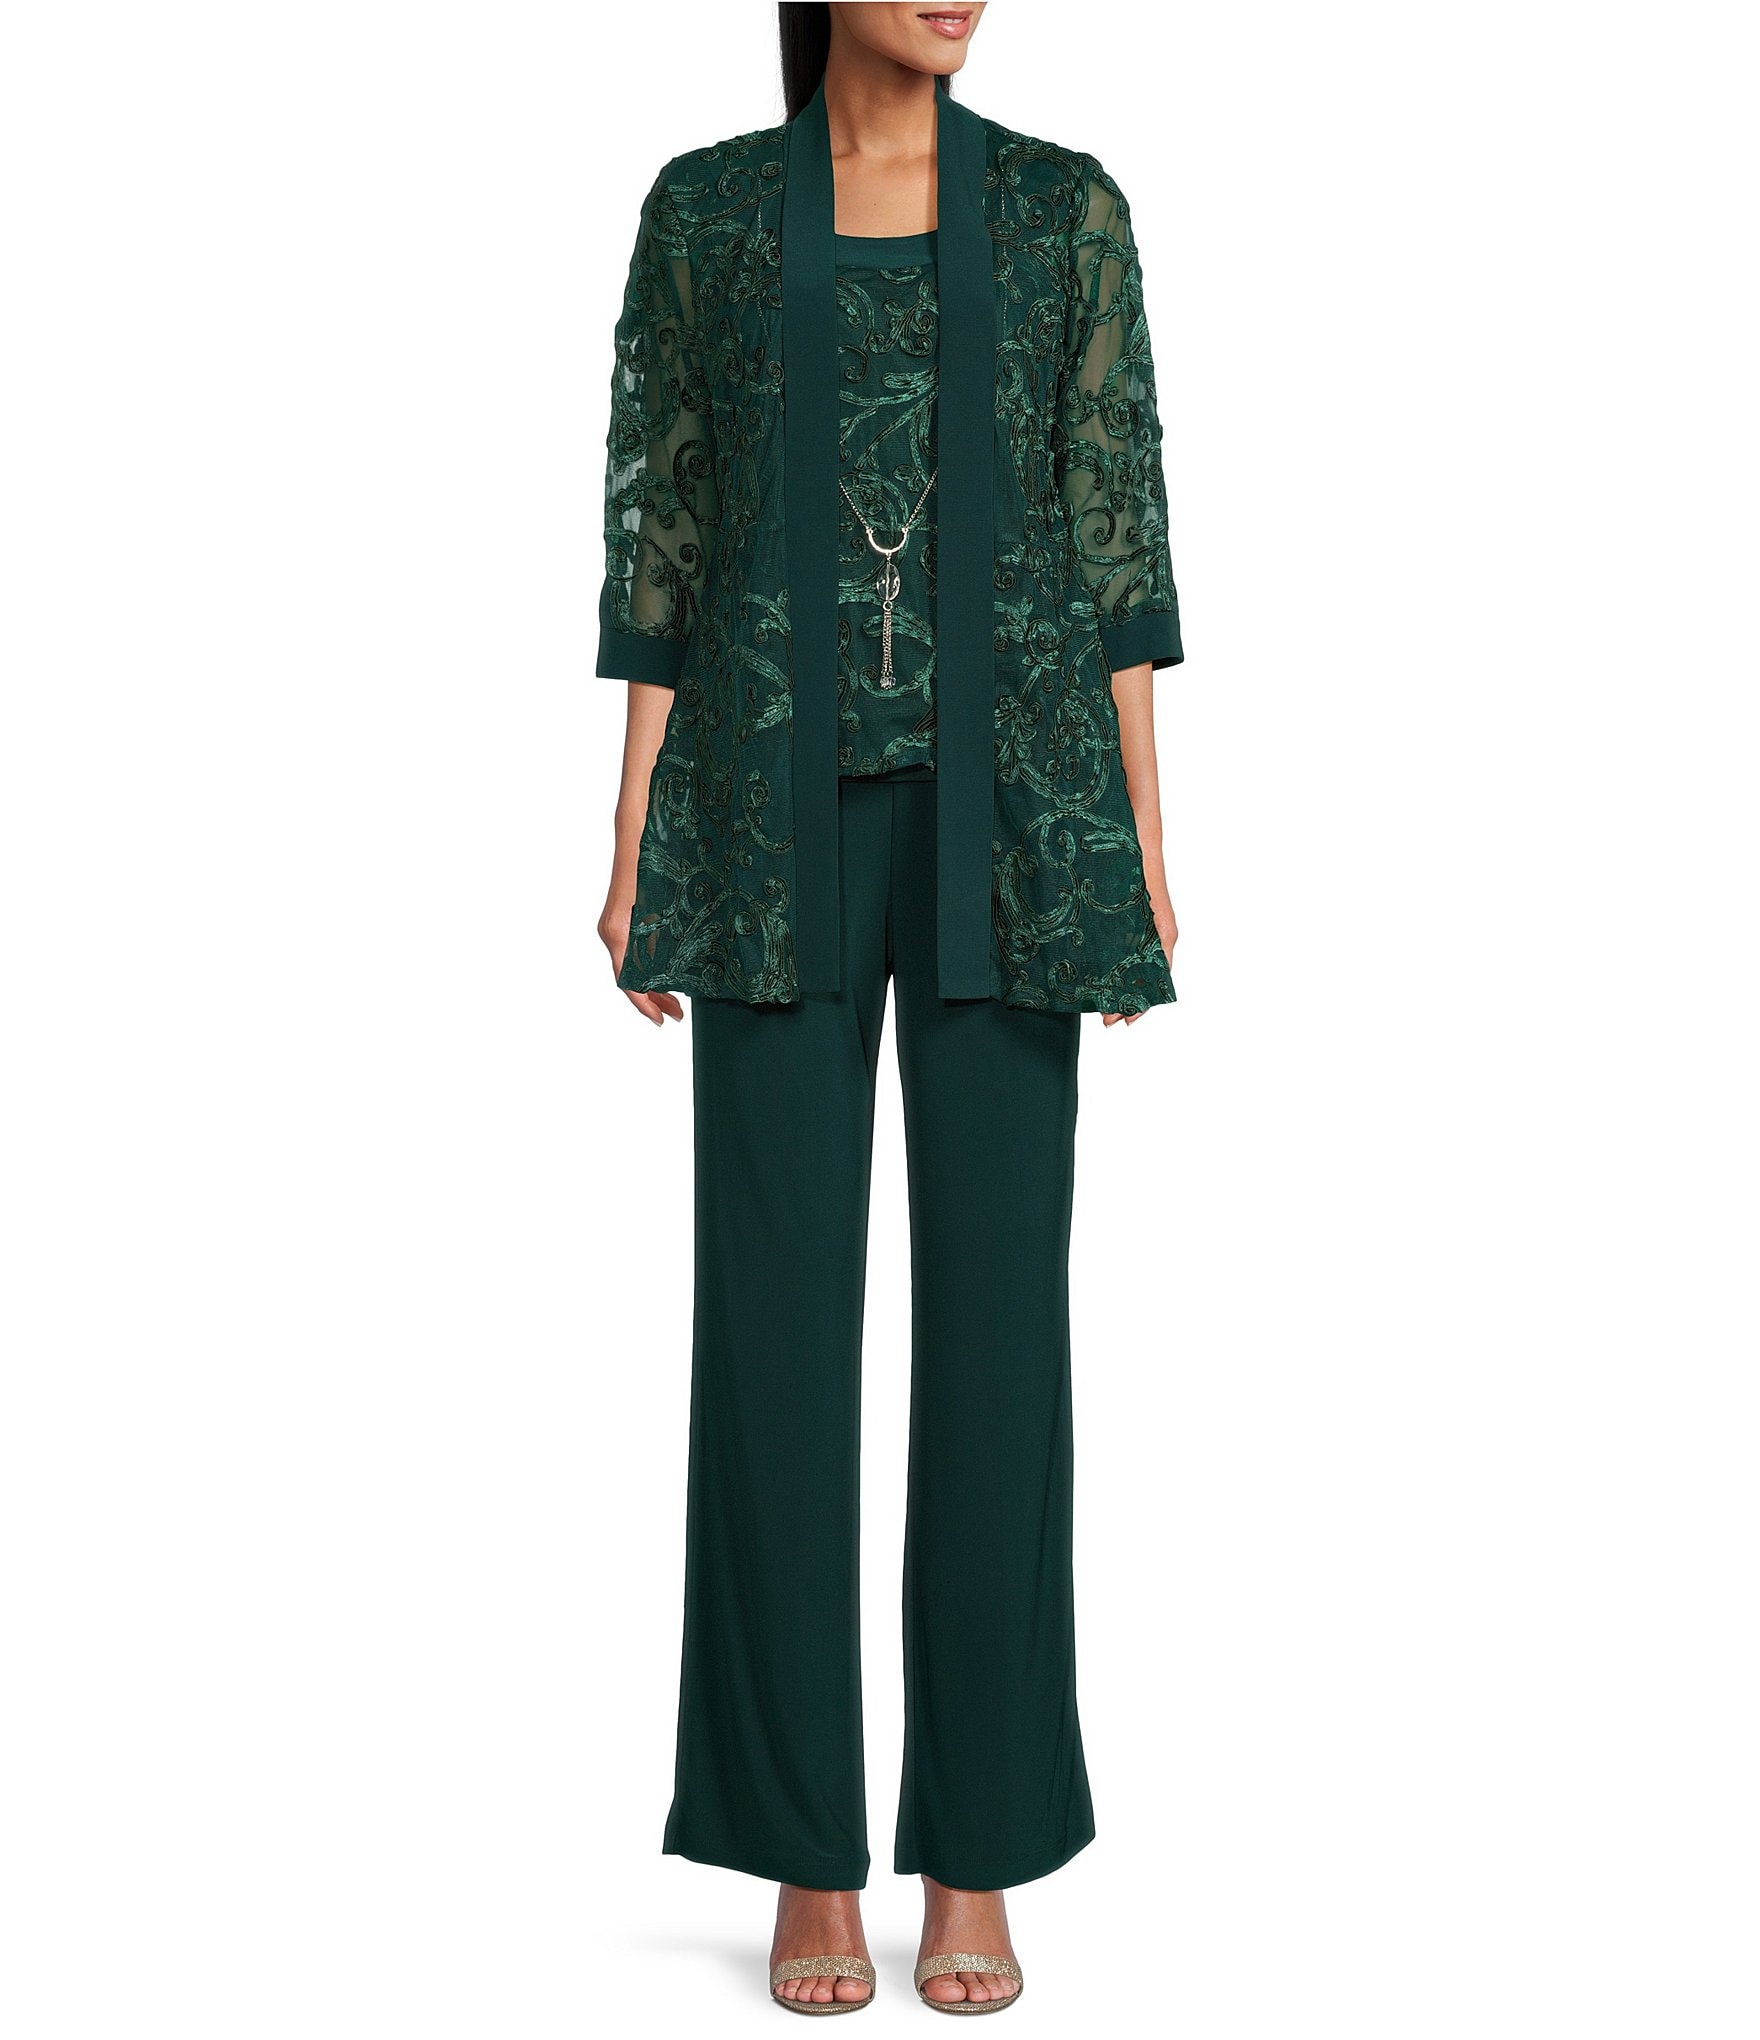 R & M Richards Women's 3Pc Duster Pant Suit, Lace Shell And 3/4